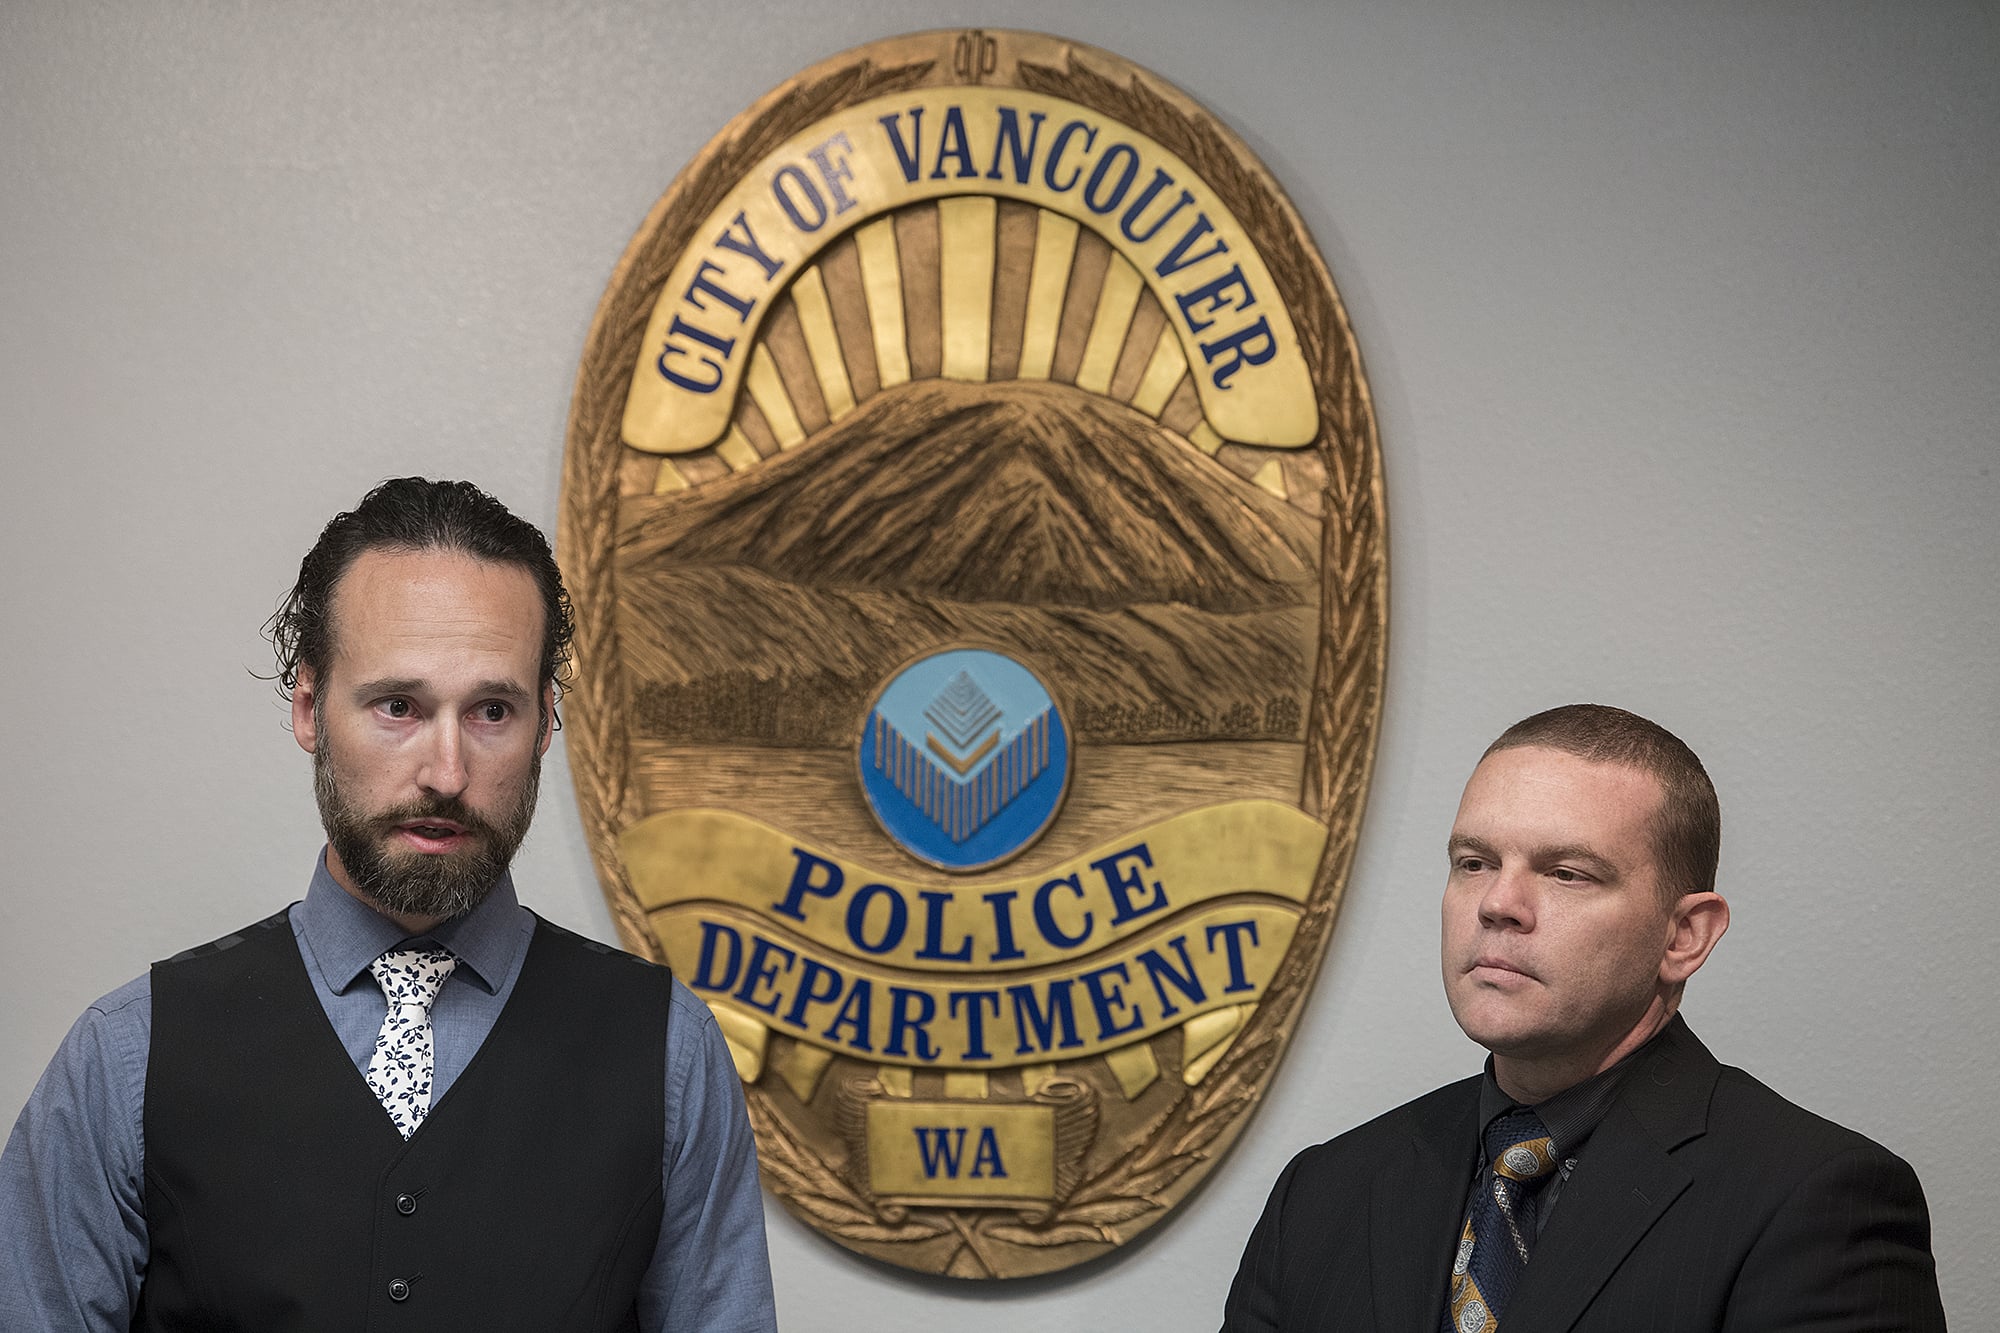 Det. Dustin Goudschaal, left, and Det. Cpl. Neil Martin speak to the media at Vancouver Police Department headquarters after making an arrest in the murder of Audrey Hoellein on Tuesday afternoon, April 30, 2019.